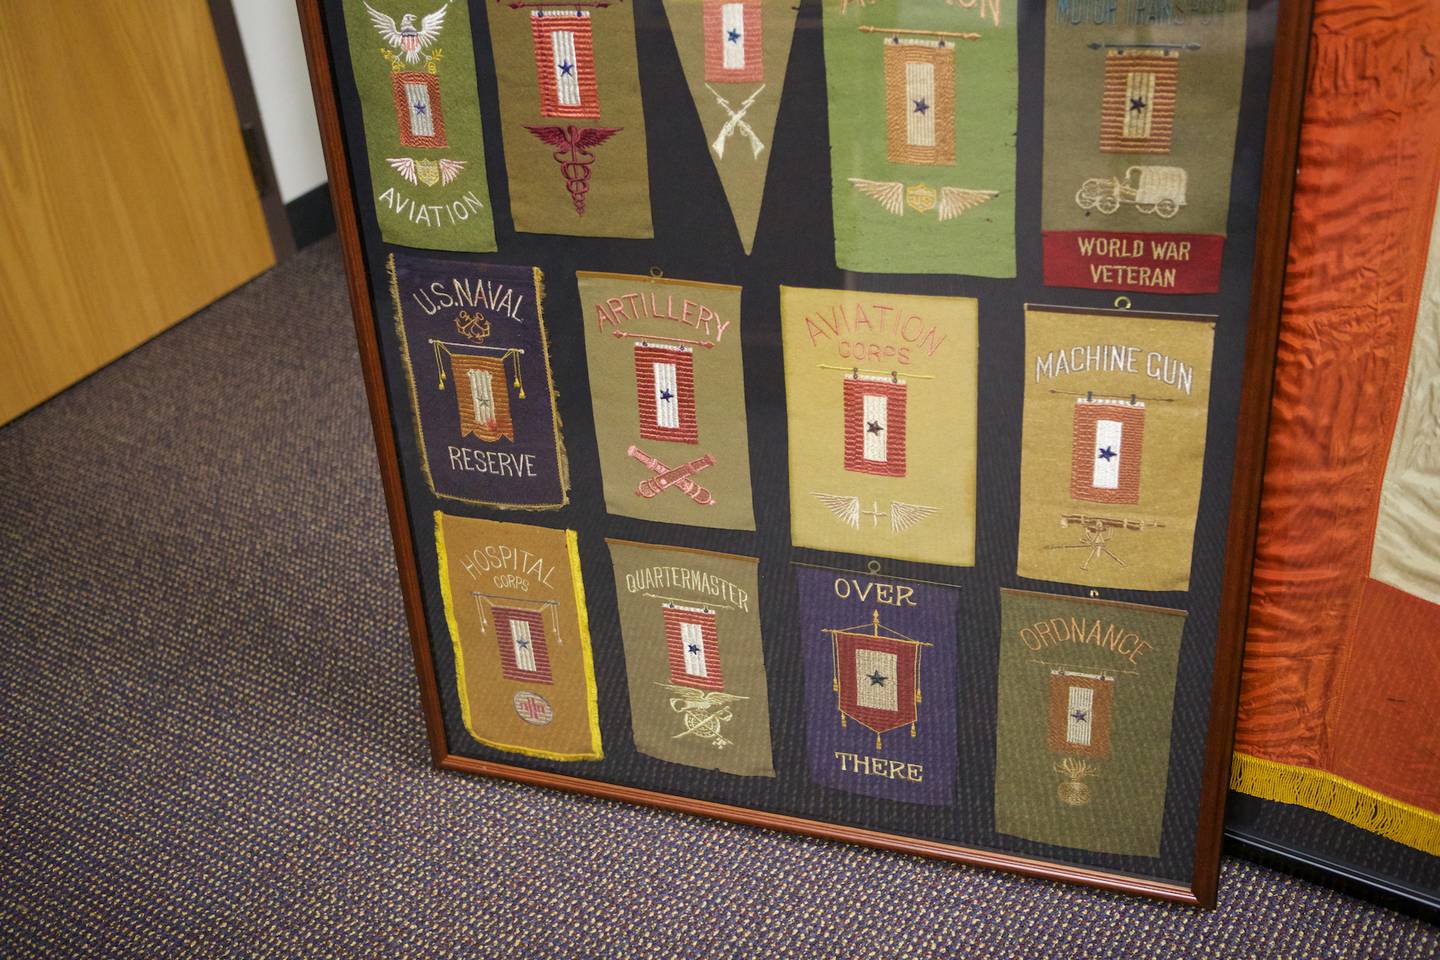 These small service flags from World War I were collected separately and framed together by Mark and Kristine Hutson of Woodstock. They are on display at the Woodstock Public Library through June 3, 2022.